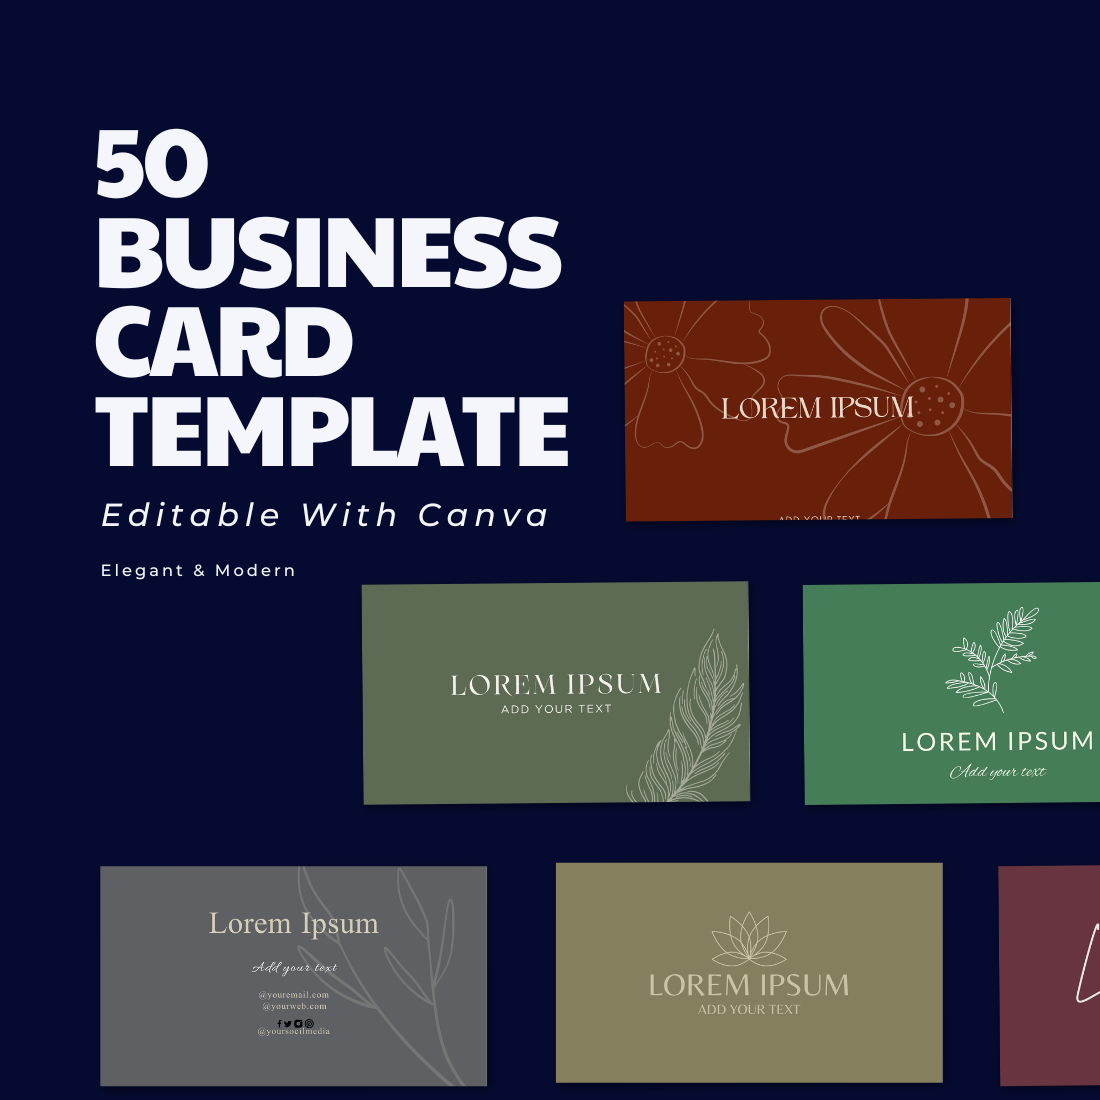 50 Business Card Template cover image.